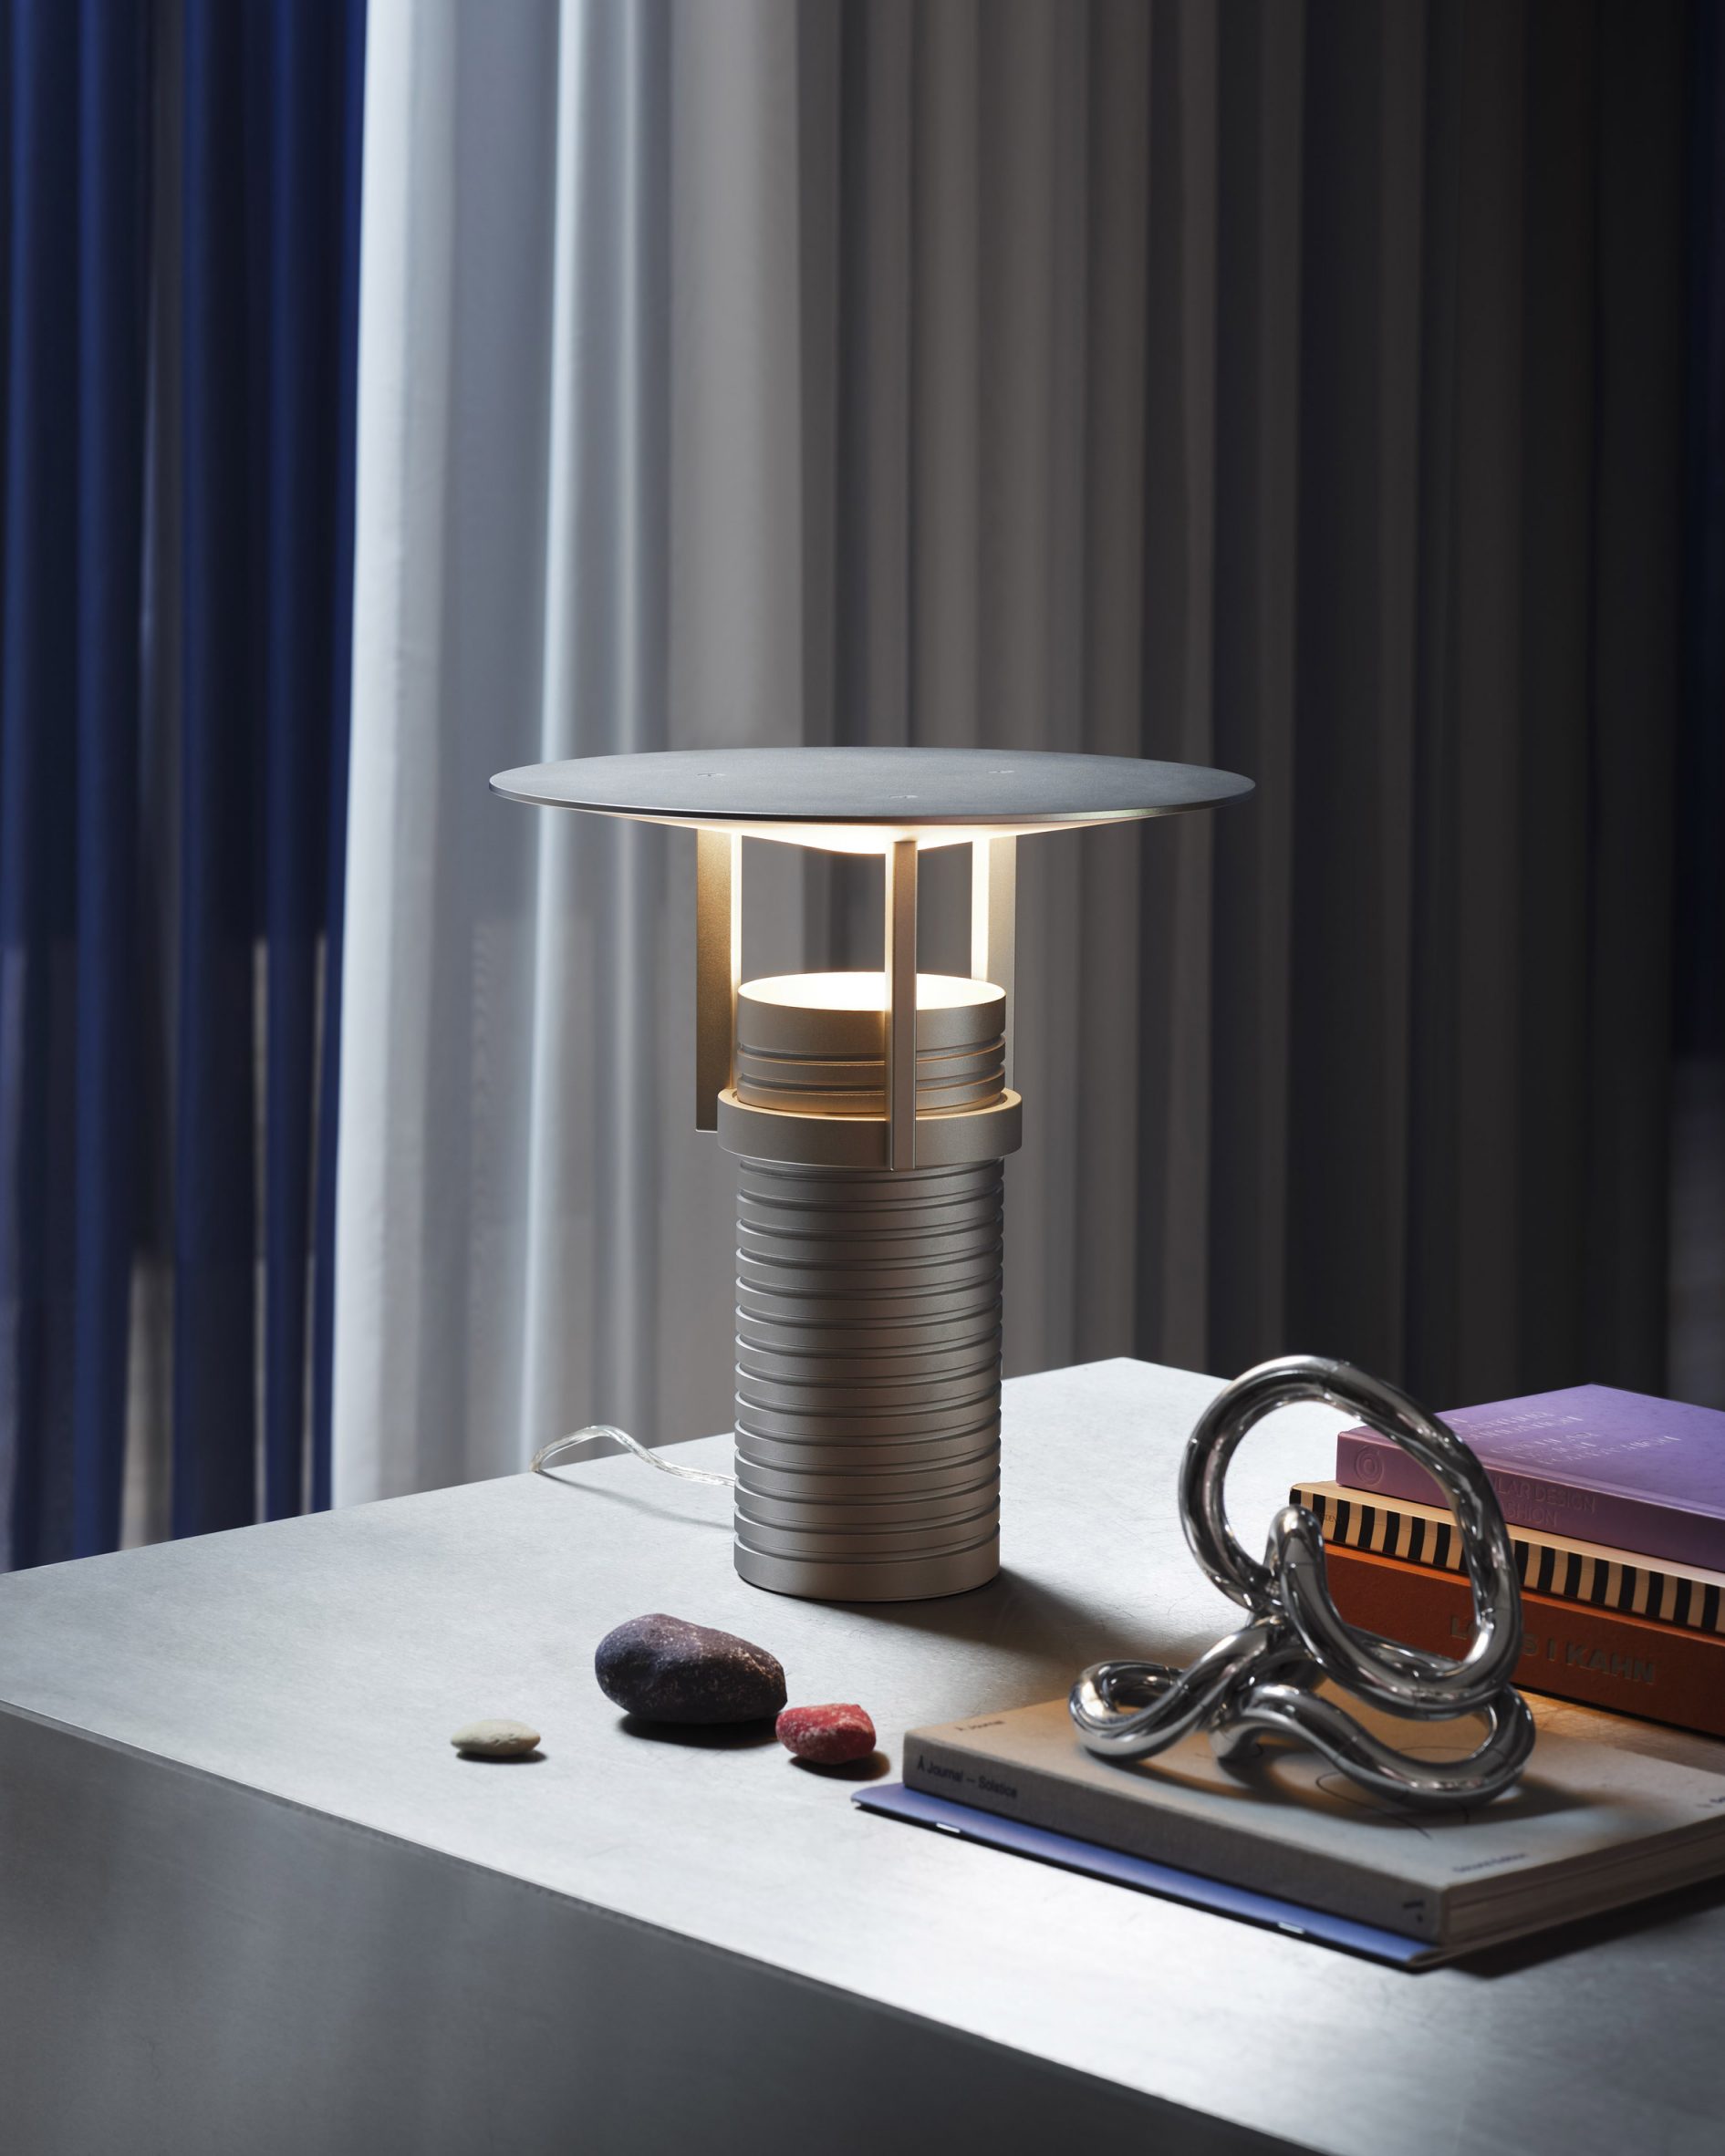 Set Lamp by Jamie Wolfond for Muuto, an intuitive table lamp made from aluminium